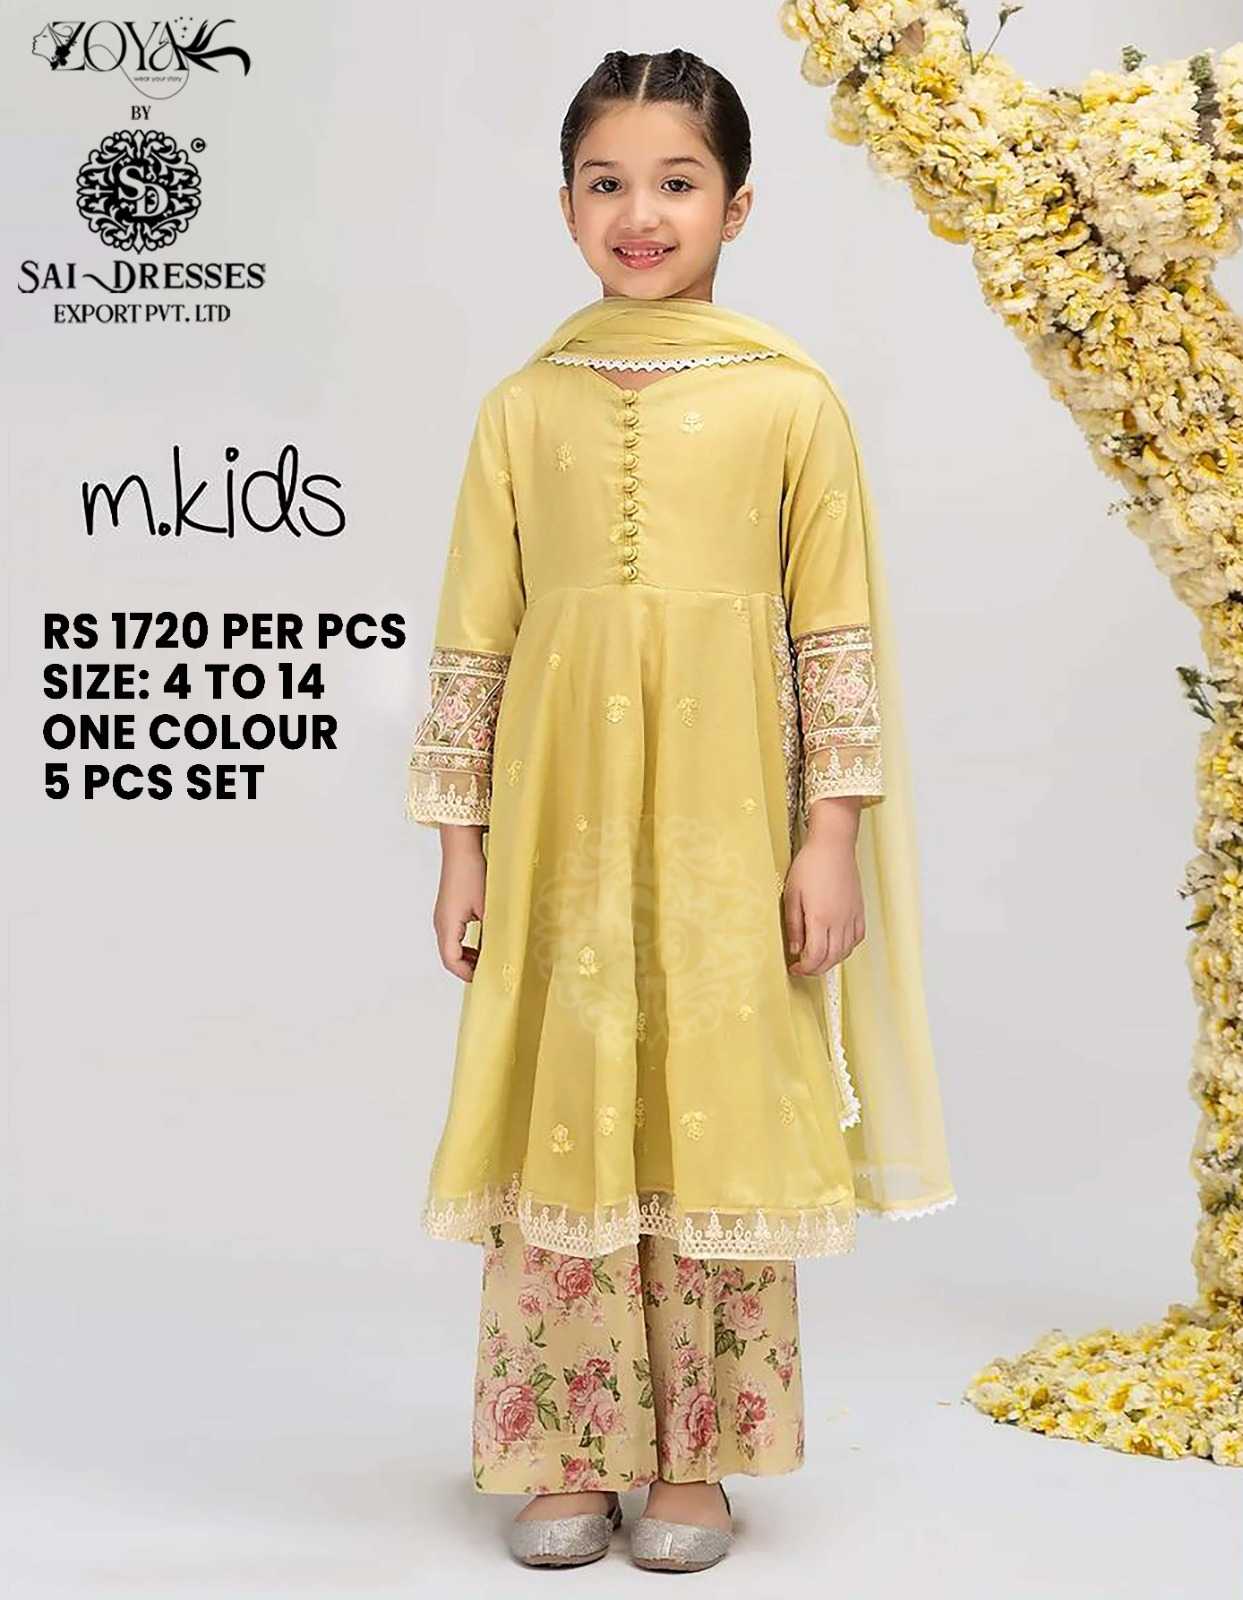 SAI DRESSES PRESENT D.NO 21 READY TO TRENDY WEAR GHARARA STYLE DESIGNER PAKISTANI KIDS COMBO SUITS IN WHOLESALE RATE IN SURAT